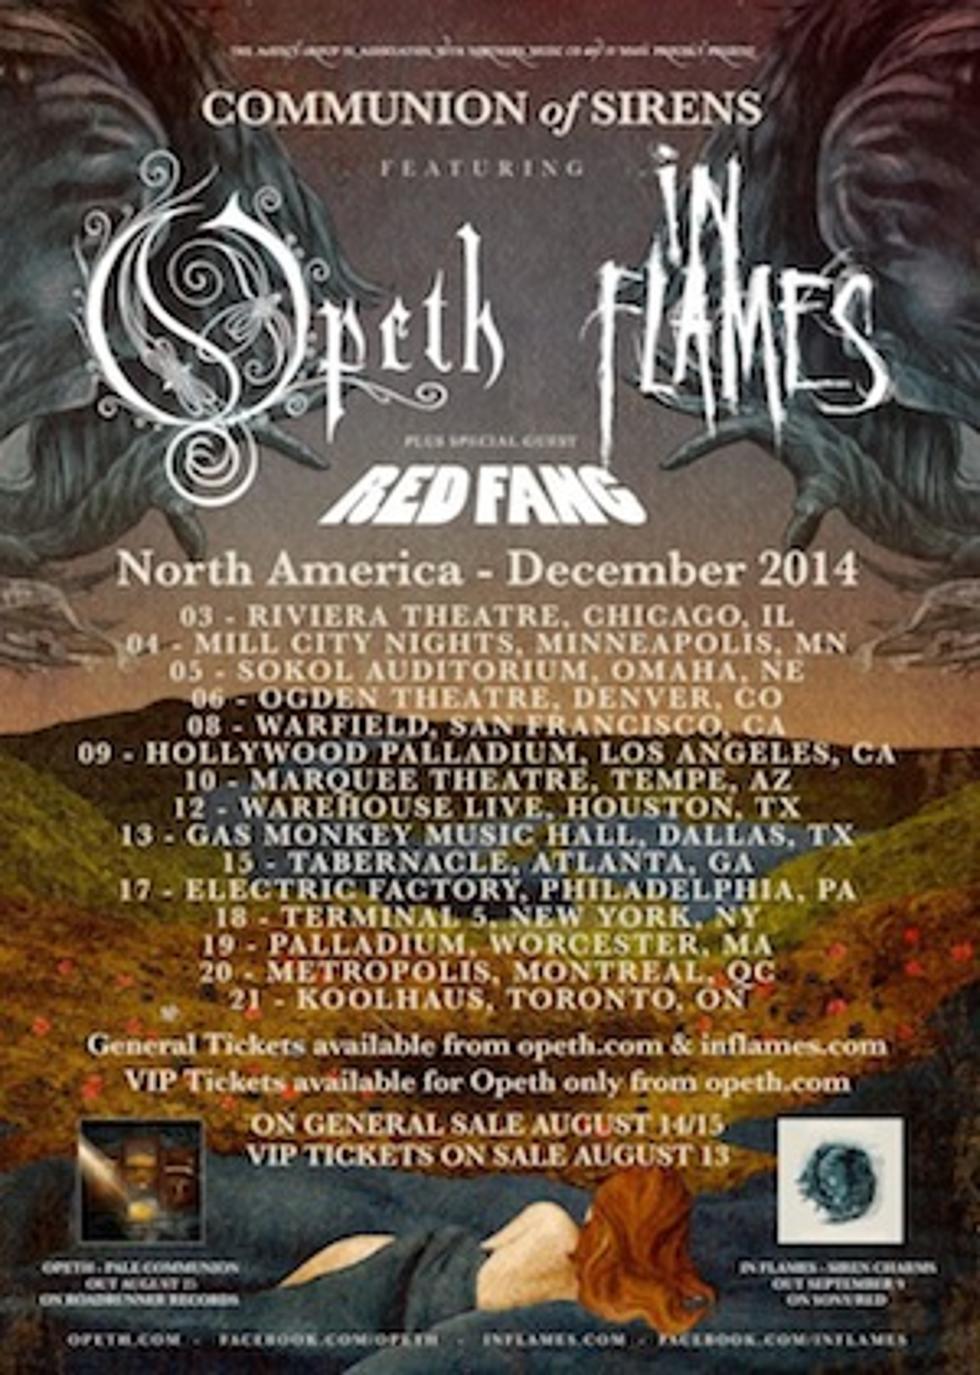 Opeth + In Flames Announce 2014 North American Tour With Red Fang